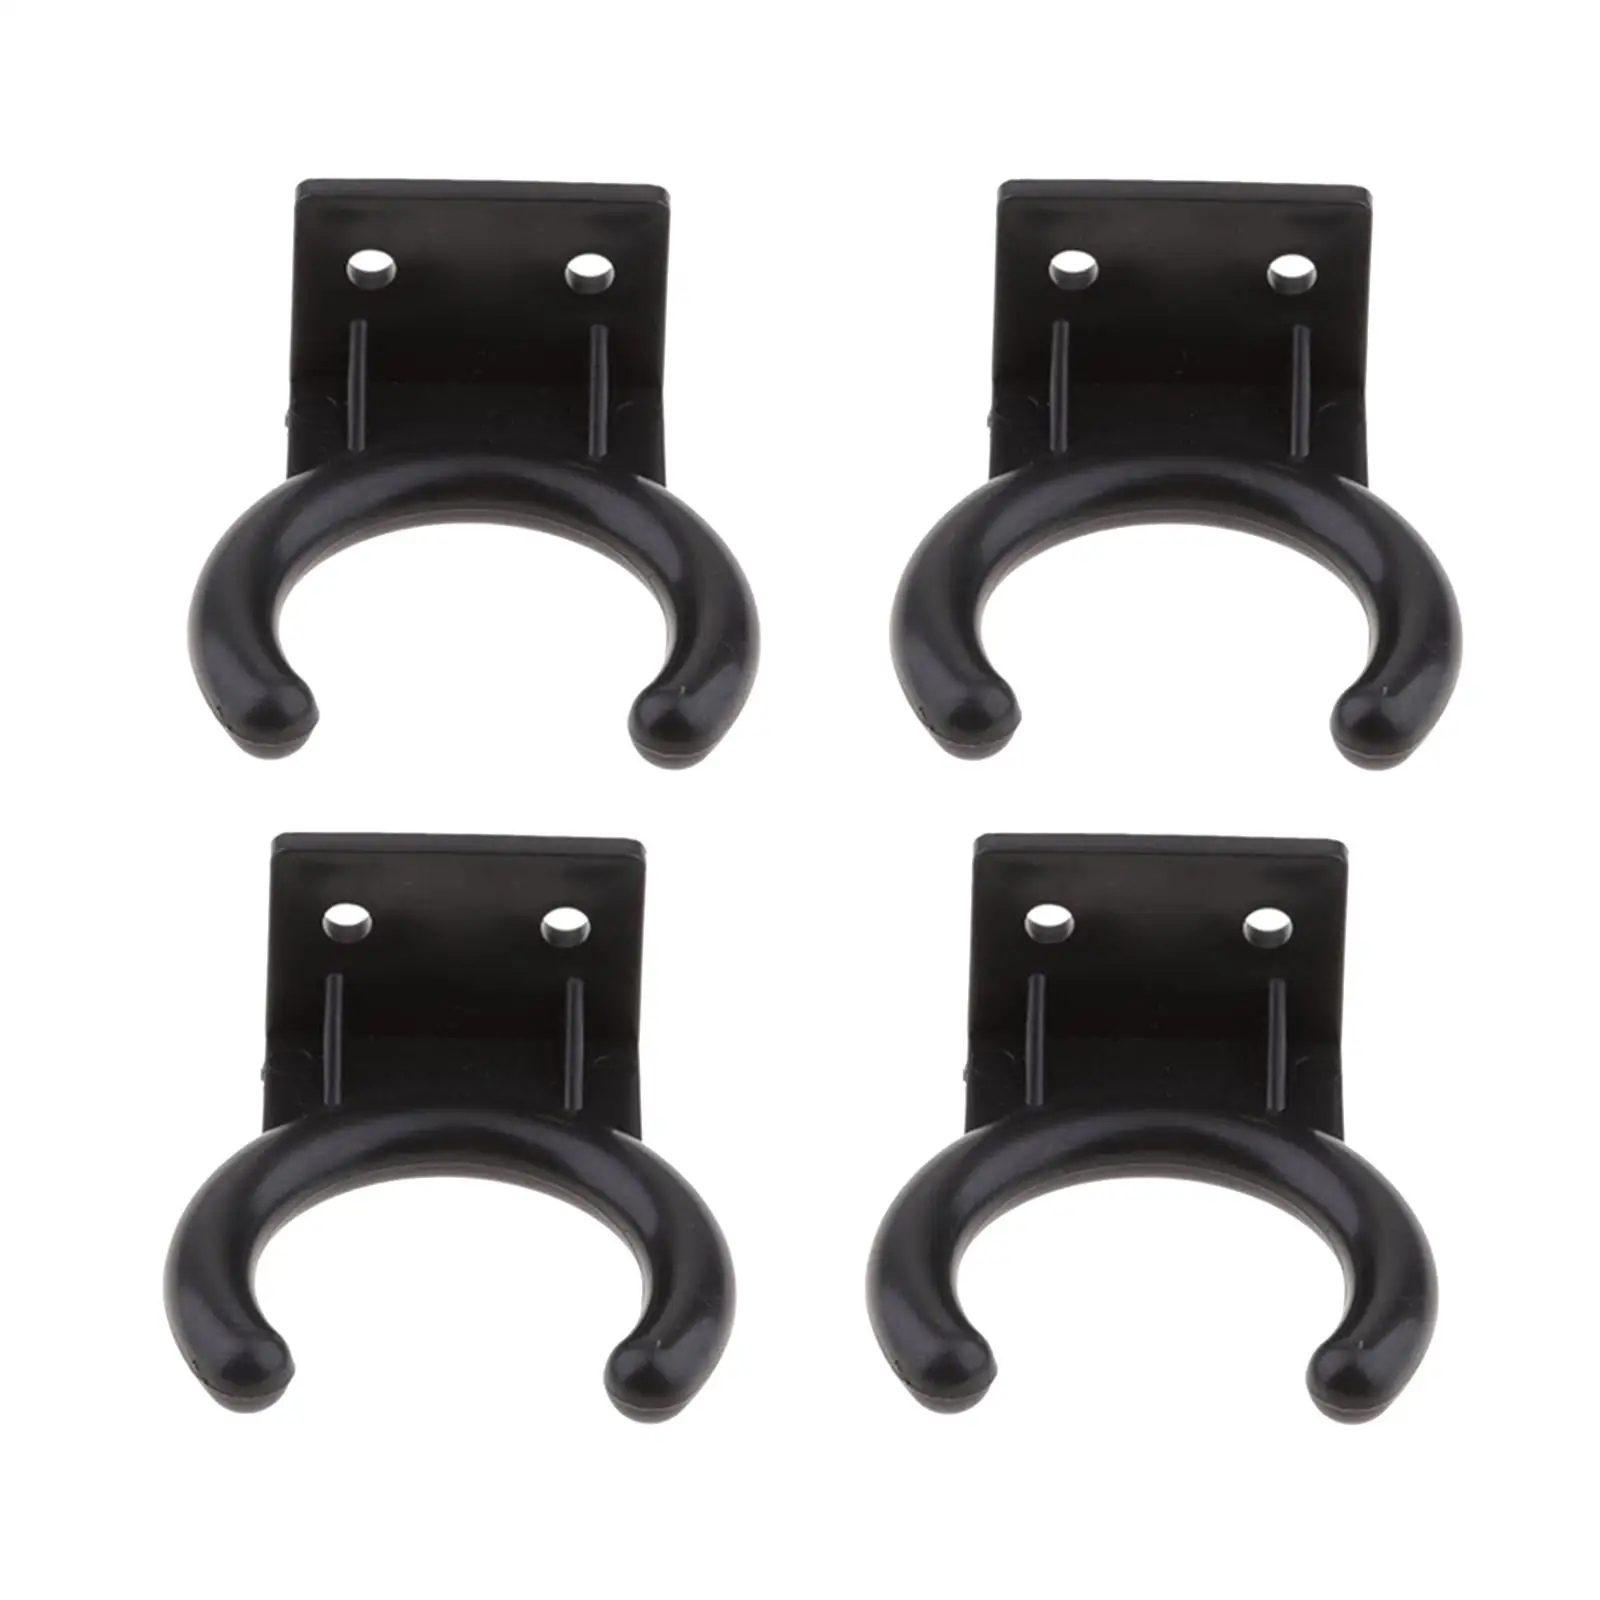 4Pcs Wall Mounted Microphone Hook Wall Hanger for Home Space Saving